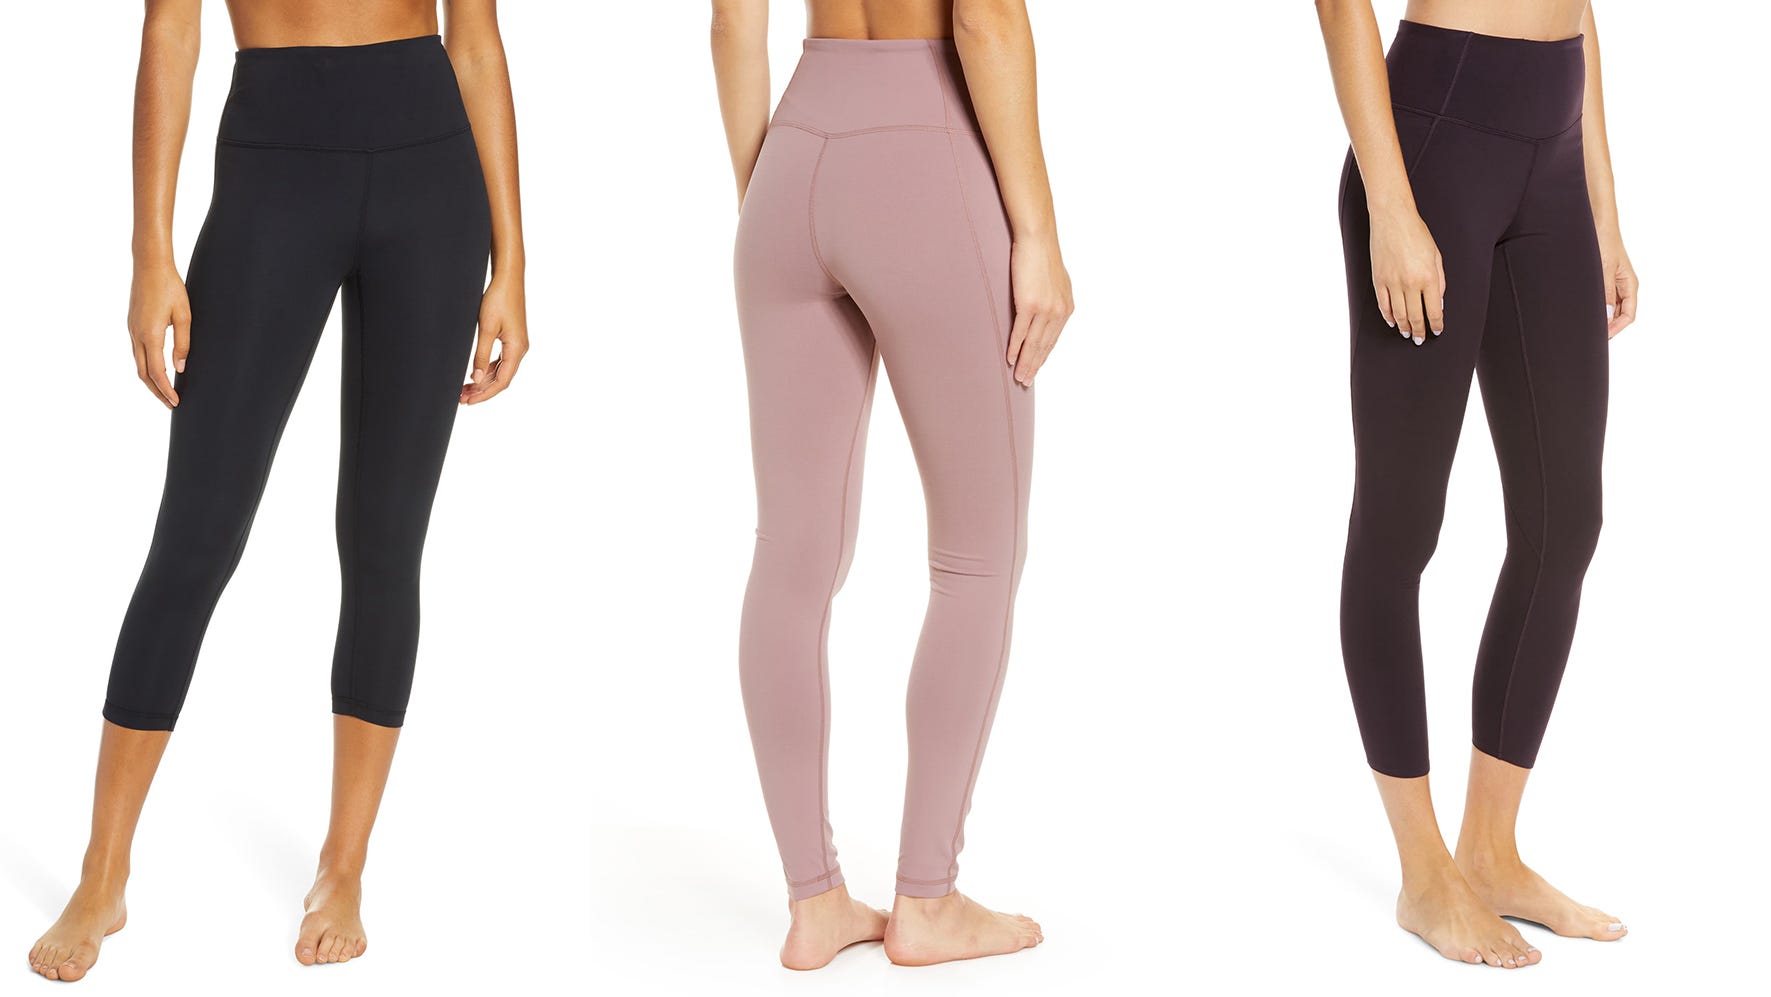 Zella leggings: Shop the Nordstrom Anniversary Sale to save on these pants